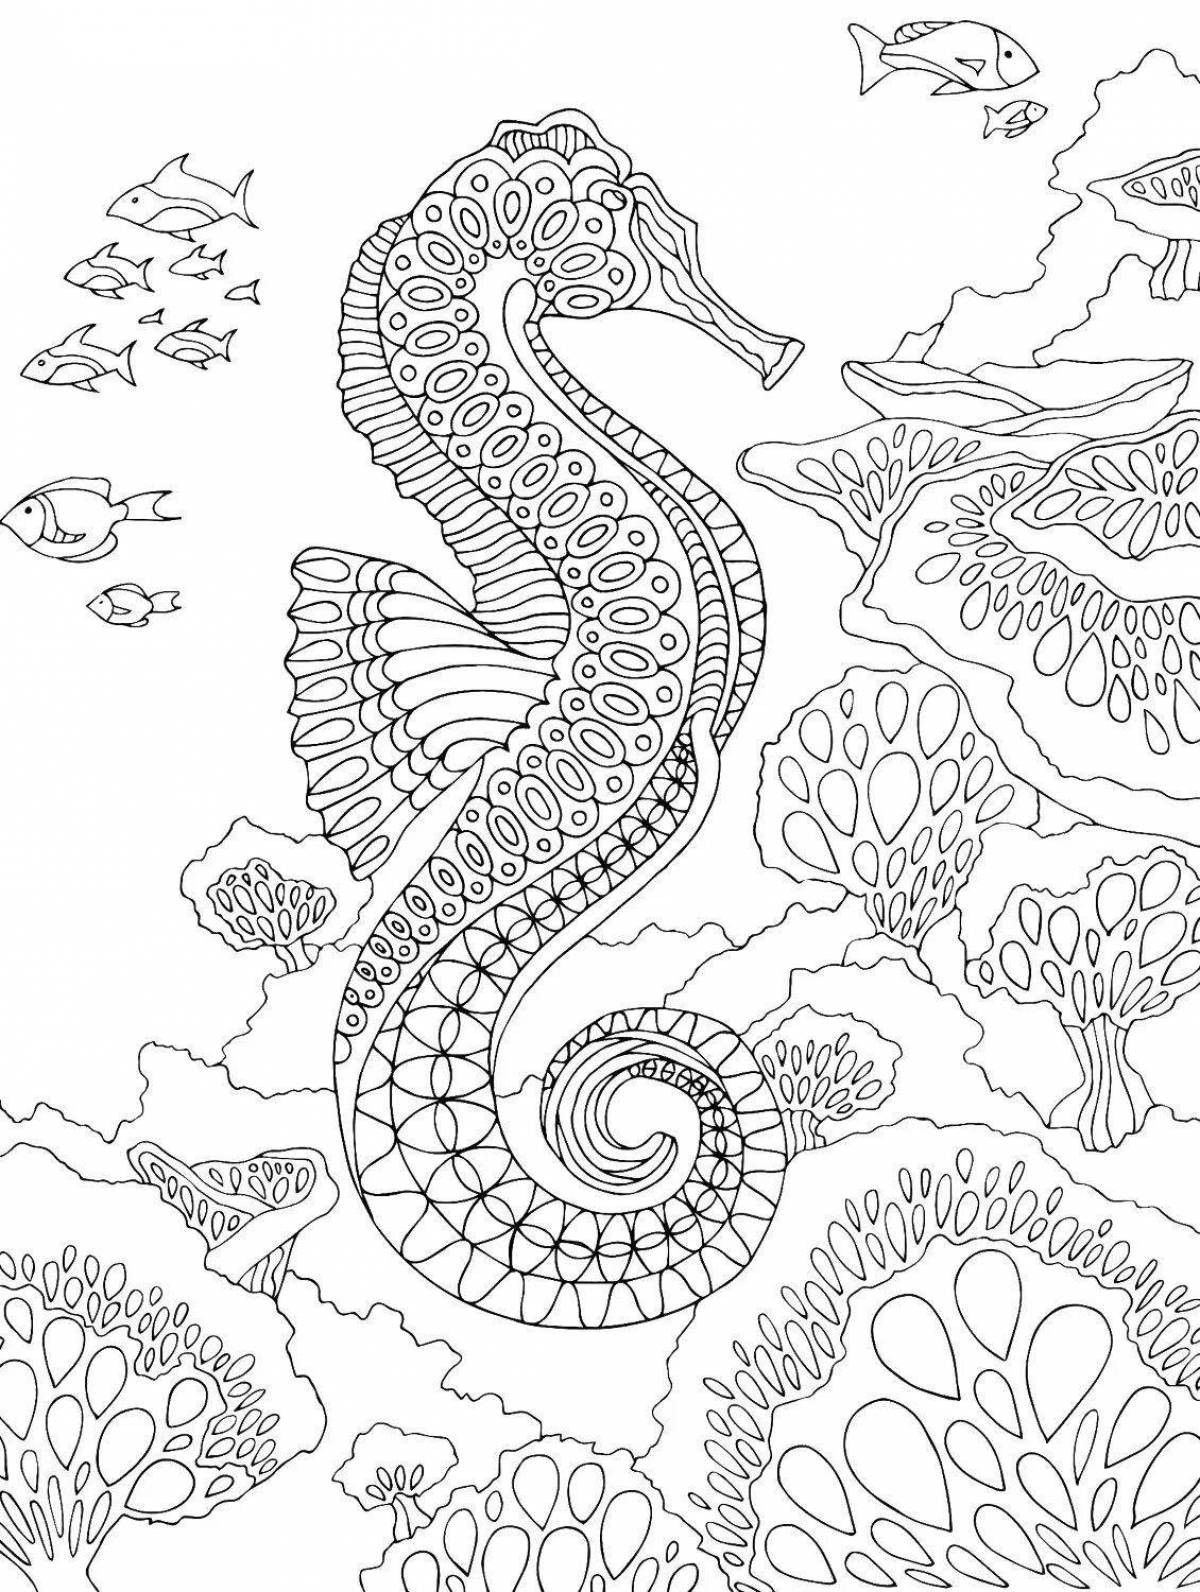 Relaxing anti-stress marine life coloring page